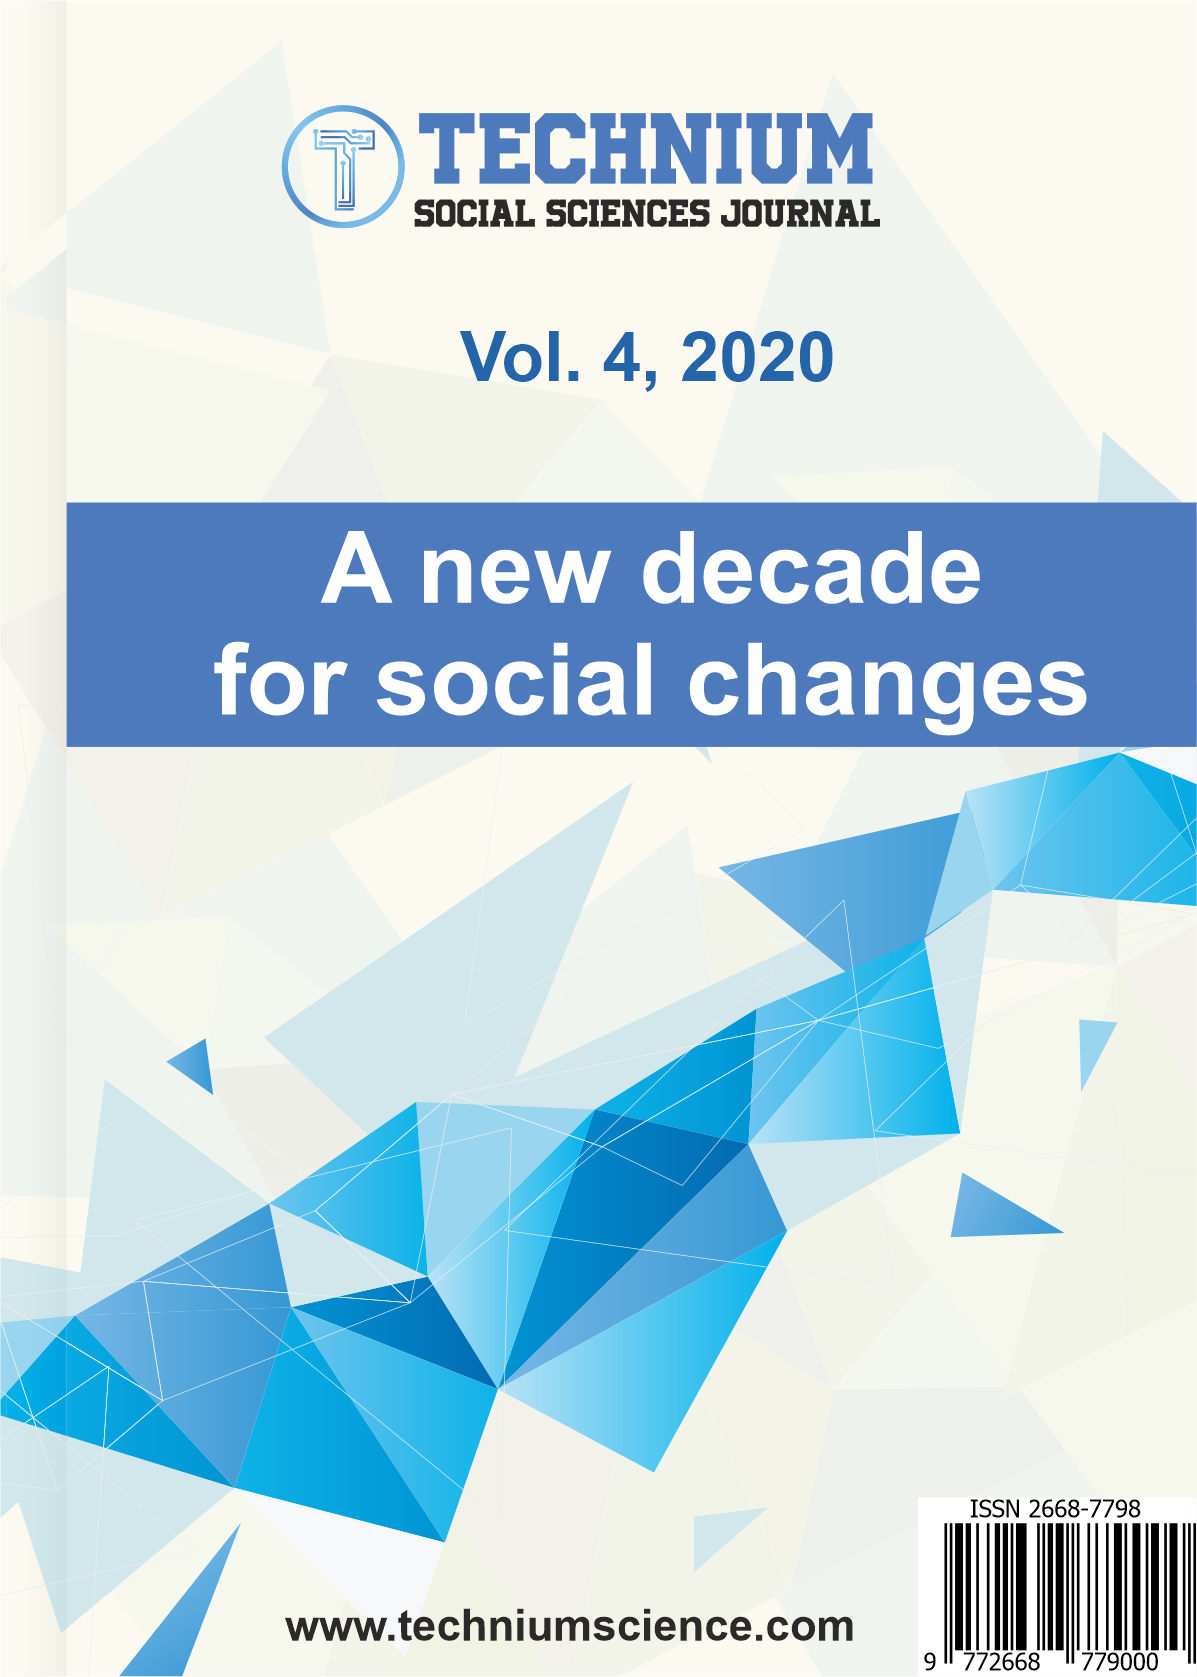 					View Vol. 4 (2020): A new decade for social changes
				